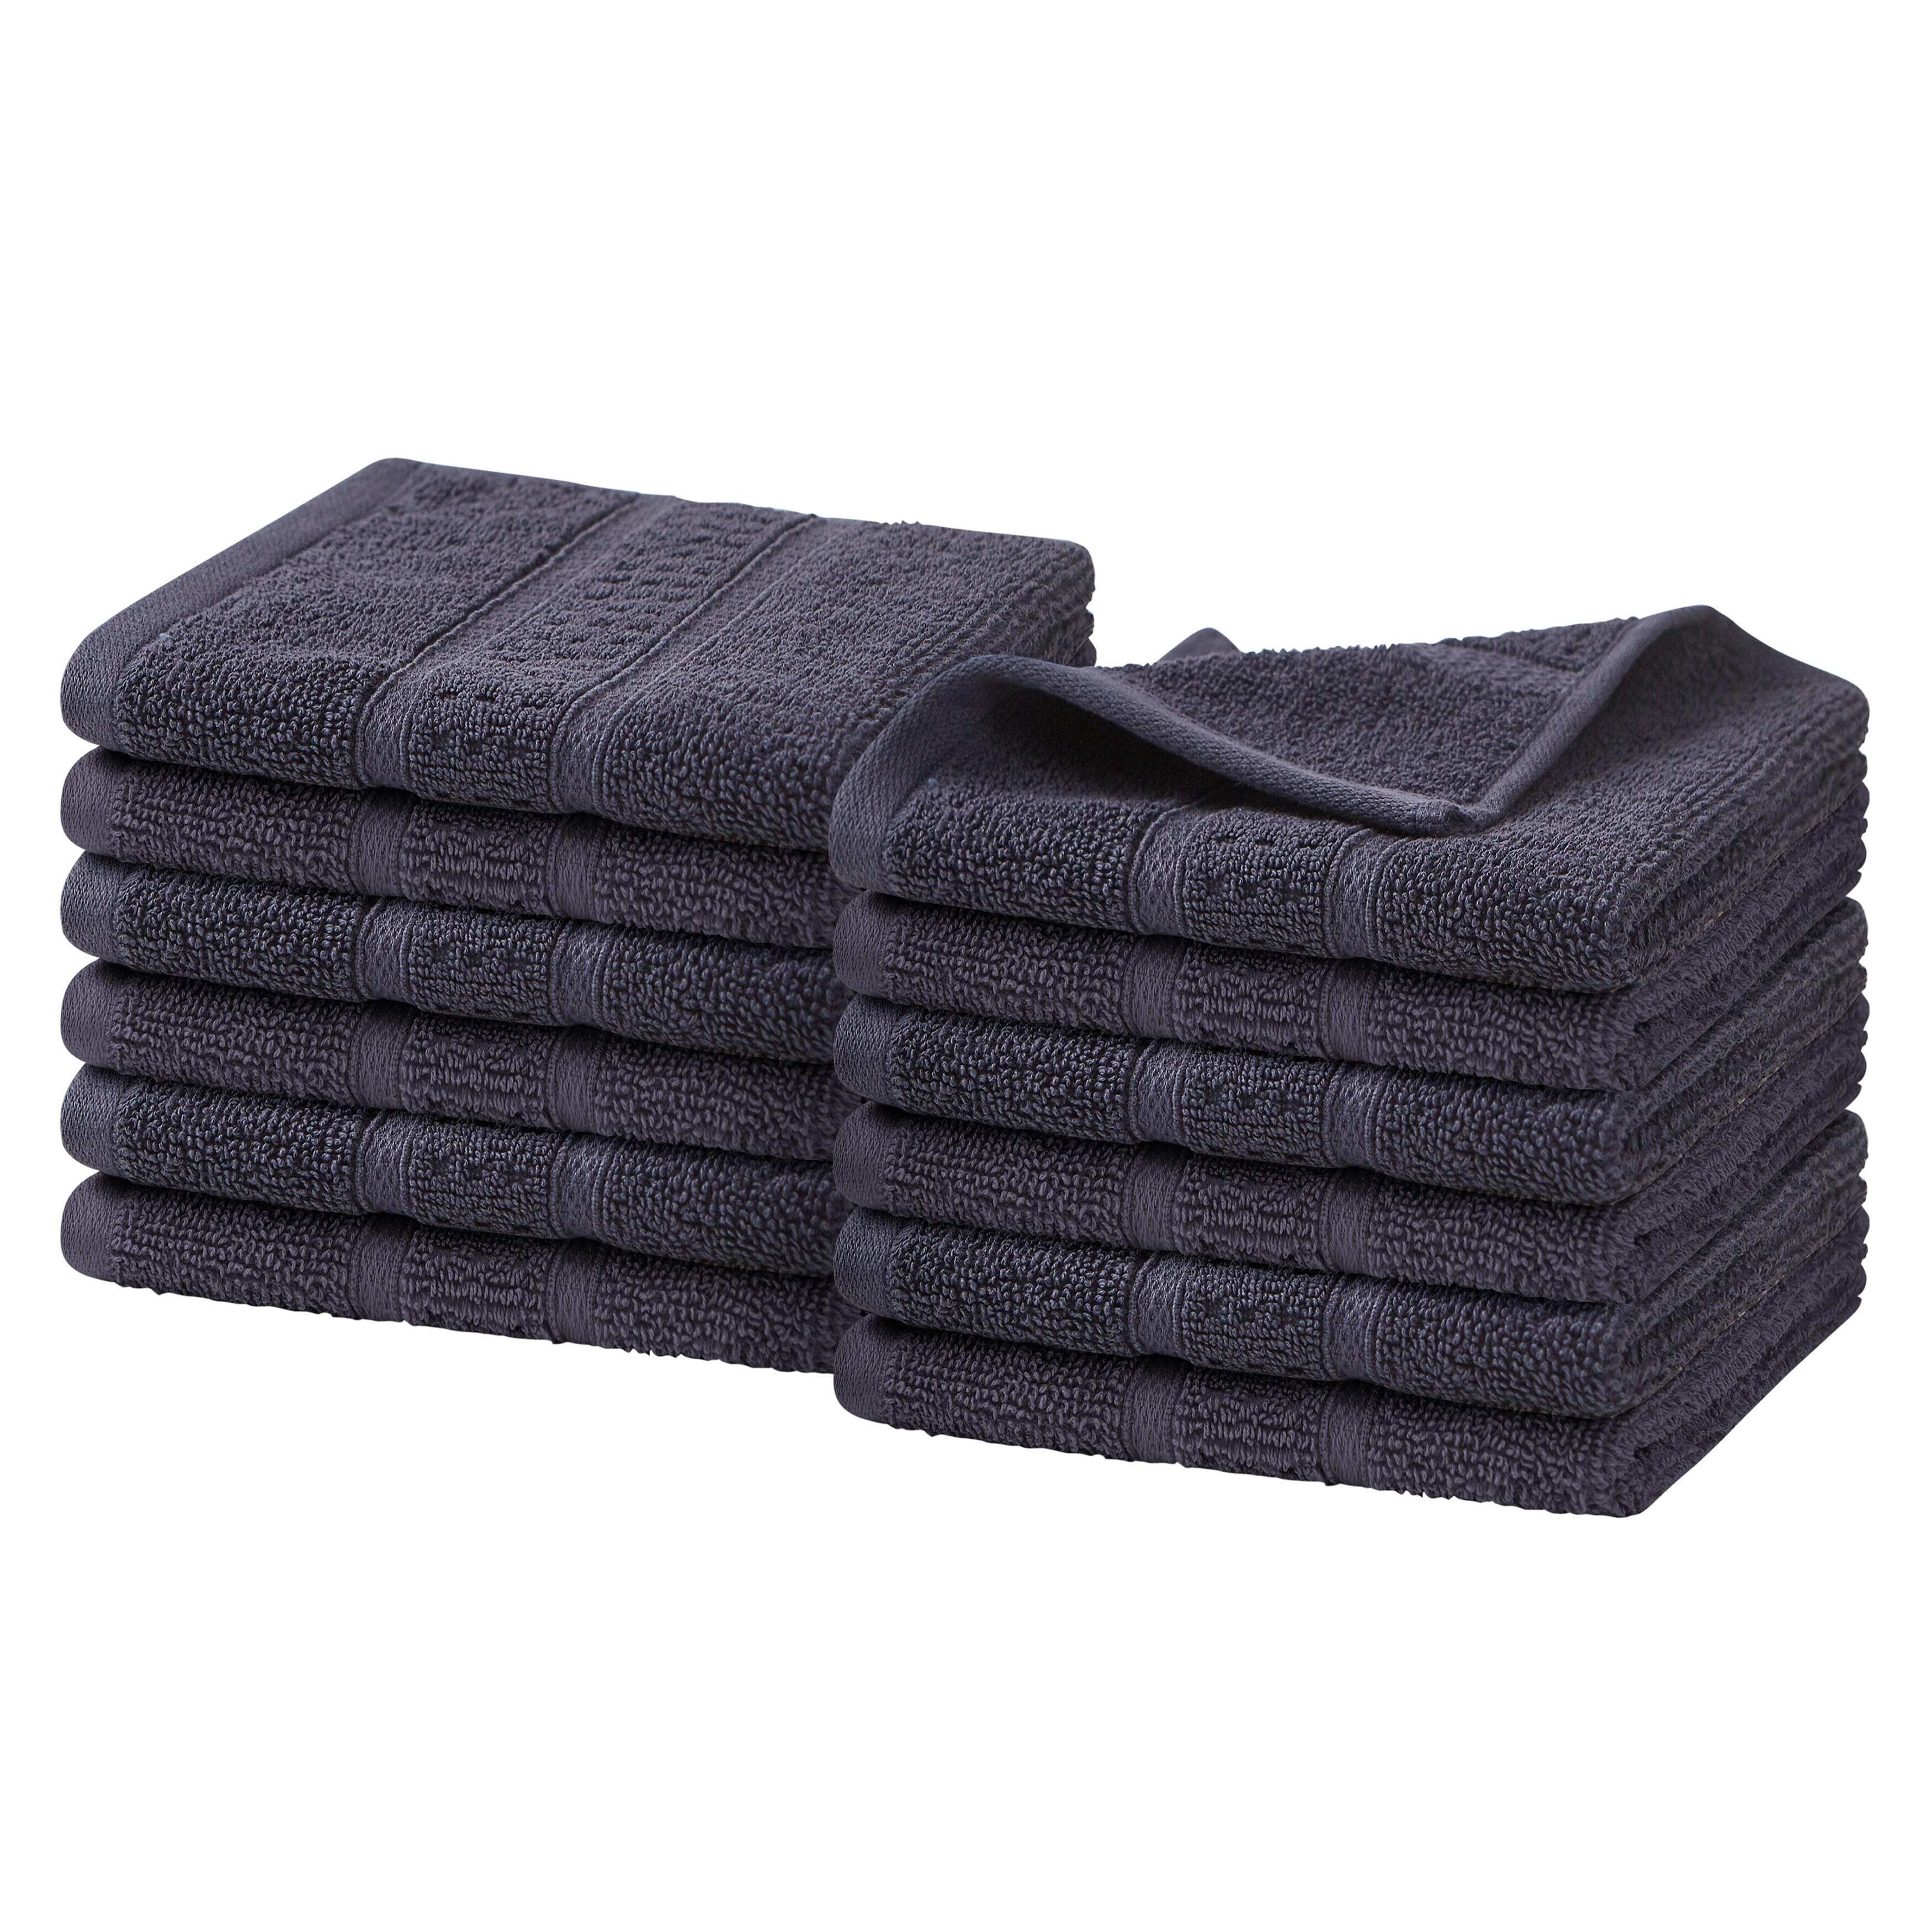 https://ak1.ostkcdn.com/images/products/is/images/direct/47ba9d2bd4d4526b97db8416411cf935a553ff3d/Nautica-Oceane-Solid-Wellness-Towel-Collection.jpg